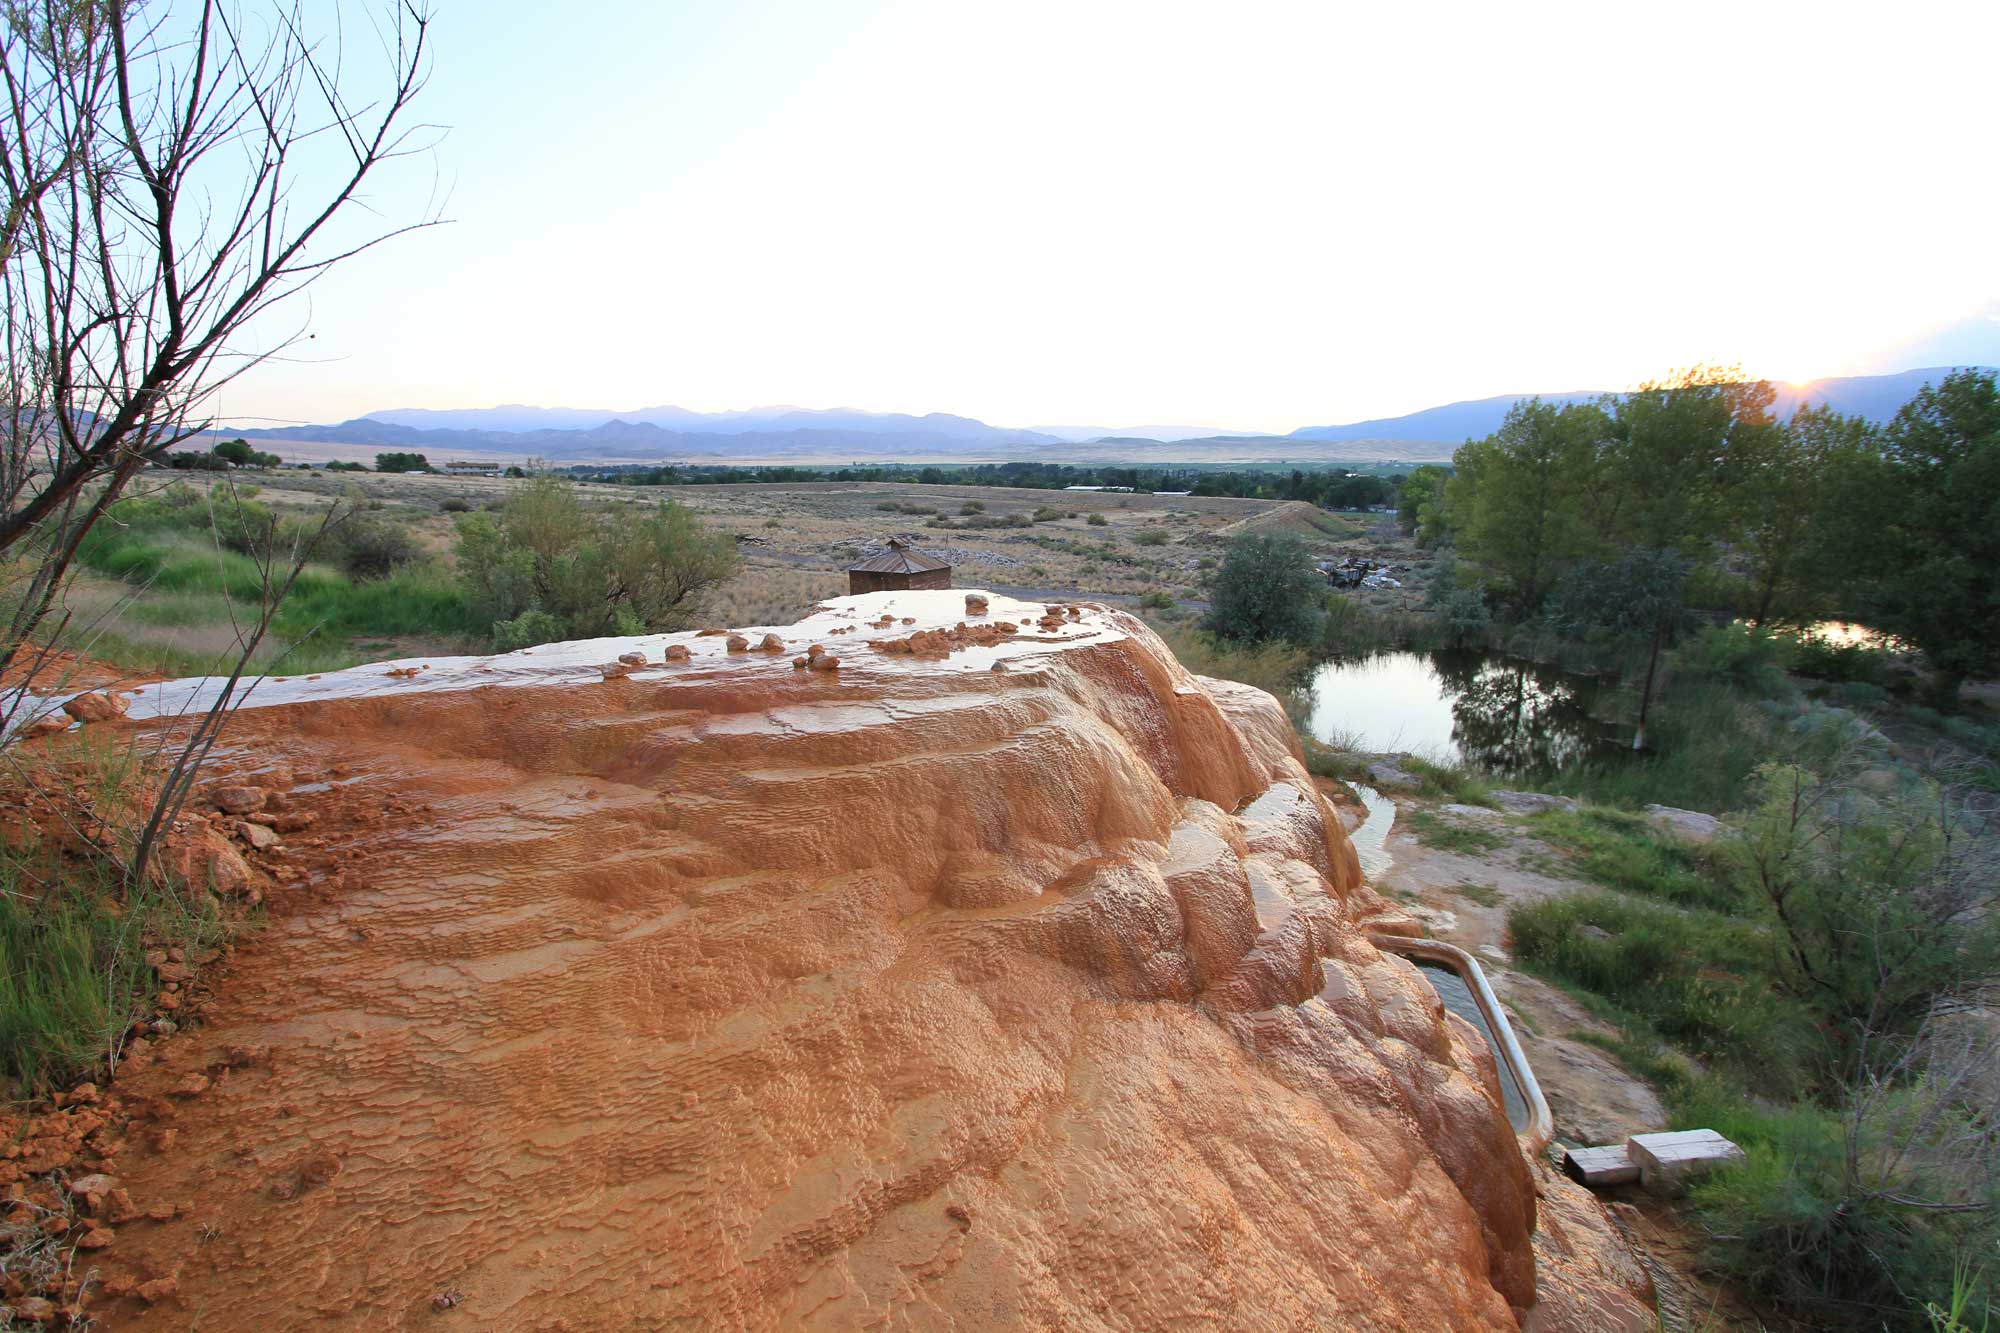 Photograph of Mystic Hot Springs in Monroe, Utah. The hot spring looks like a wet bound of orange rock with a thin film of water sitting on the top. At the bottom edge of the hot spring, a bathtub filled with water can be seen. In the background is a dry landscape with a pool of water. Mountains are on the horizon.